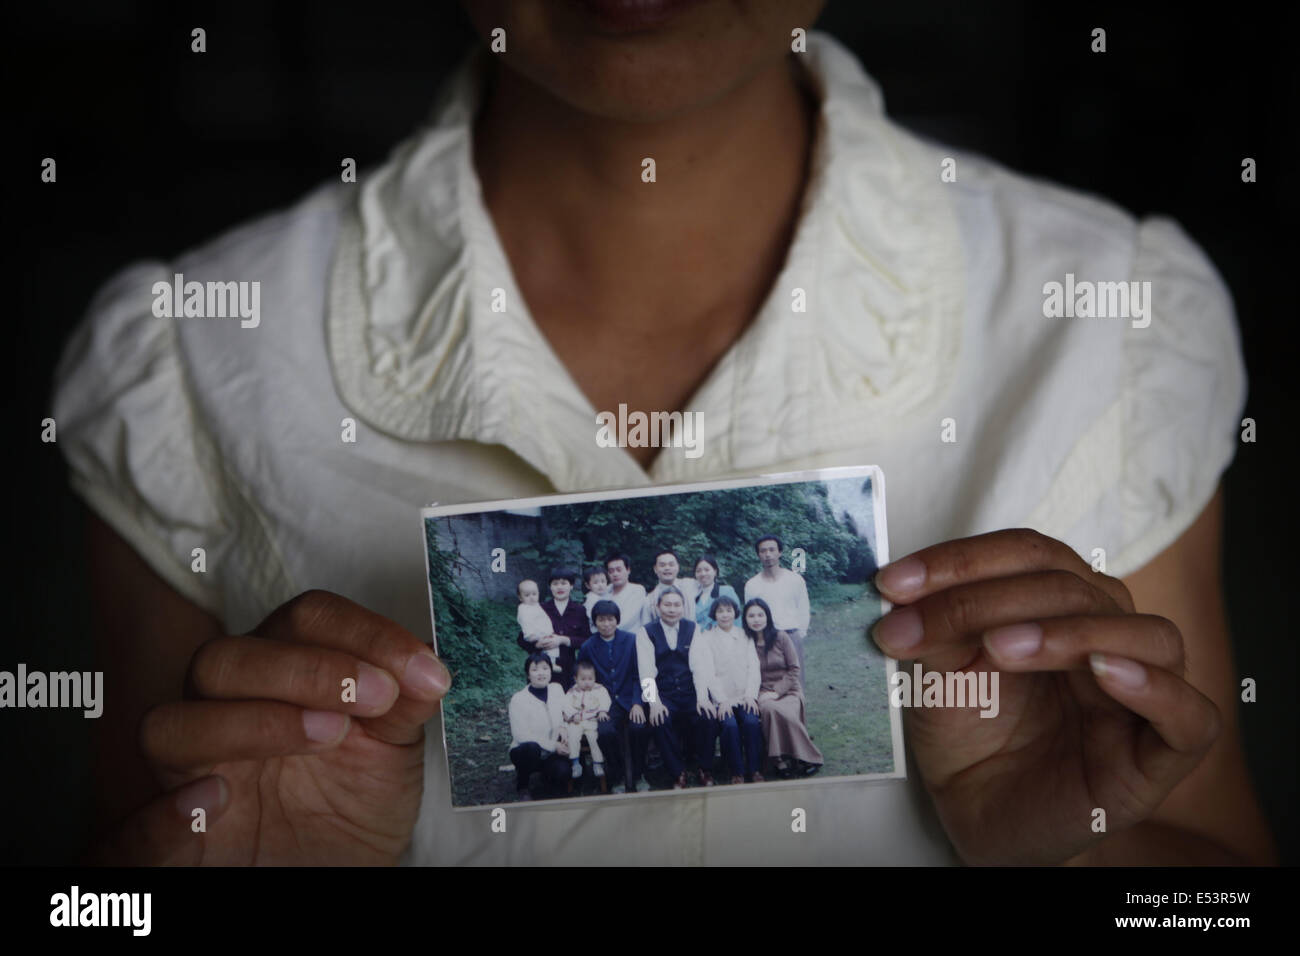 Bangkok, Thailand. 19th July, 2014. Jiang Kong, a Falun Gong practitioner and political refugee from China shows a family picture that was taken in her hometown back in China.Her father was tortured to dead by the infamous bureau 610, in one of the many black sites across China designed to make Falun Gong practitioners renounce their beliefs.The Falun Gong movement aka Falun Dafa movement is a banned movement in China that has tens of milions practitioners worldwide.In China followers get persecuted and send to labor camps, brainwash centras and concentration camps to renounce their beliefs. © Stock Photo